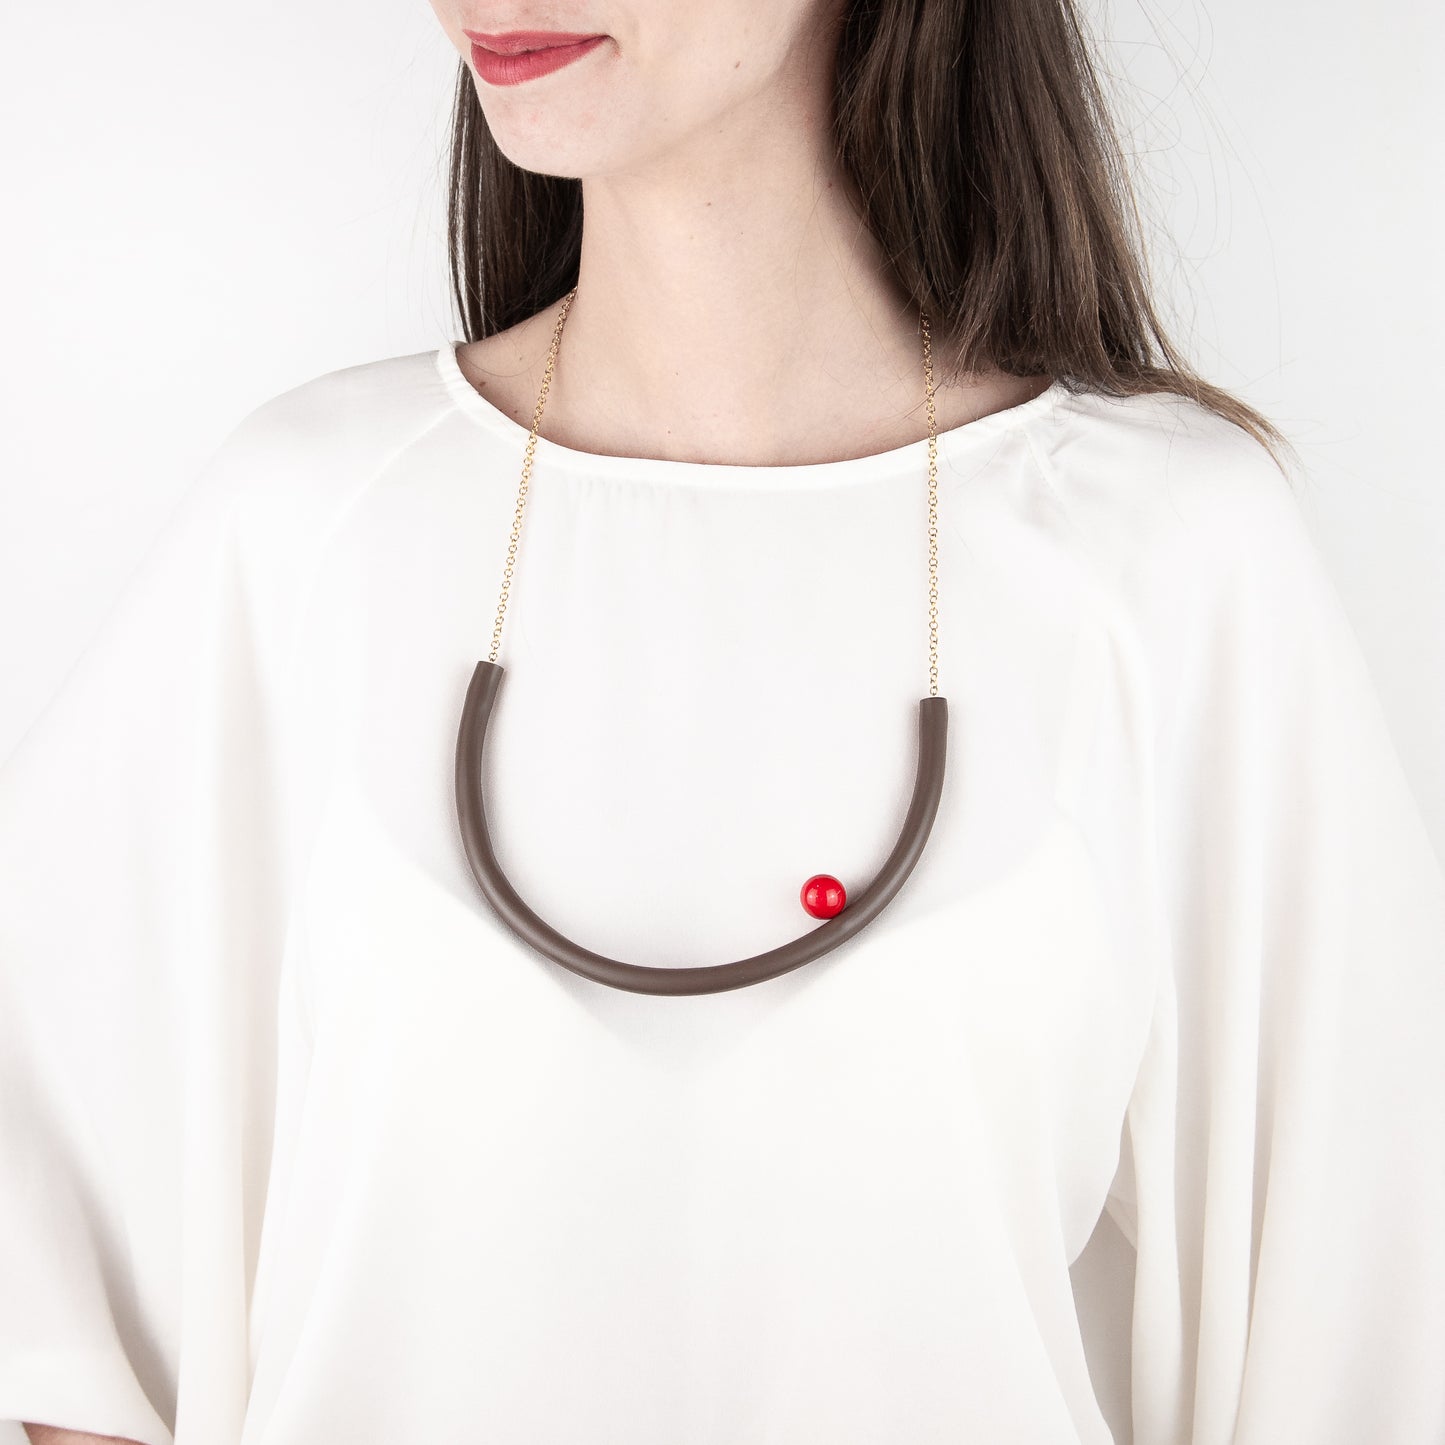 BILICO round necklace - brown / red pearl